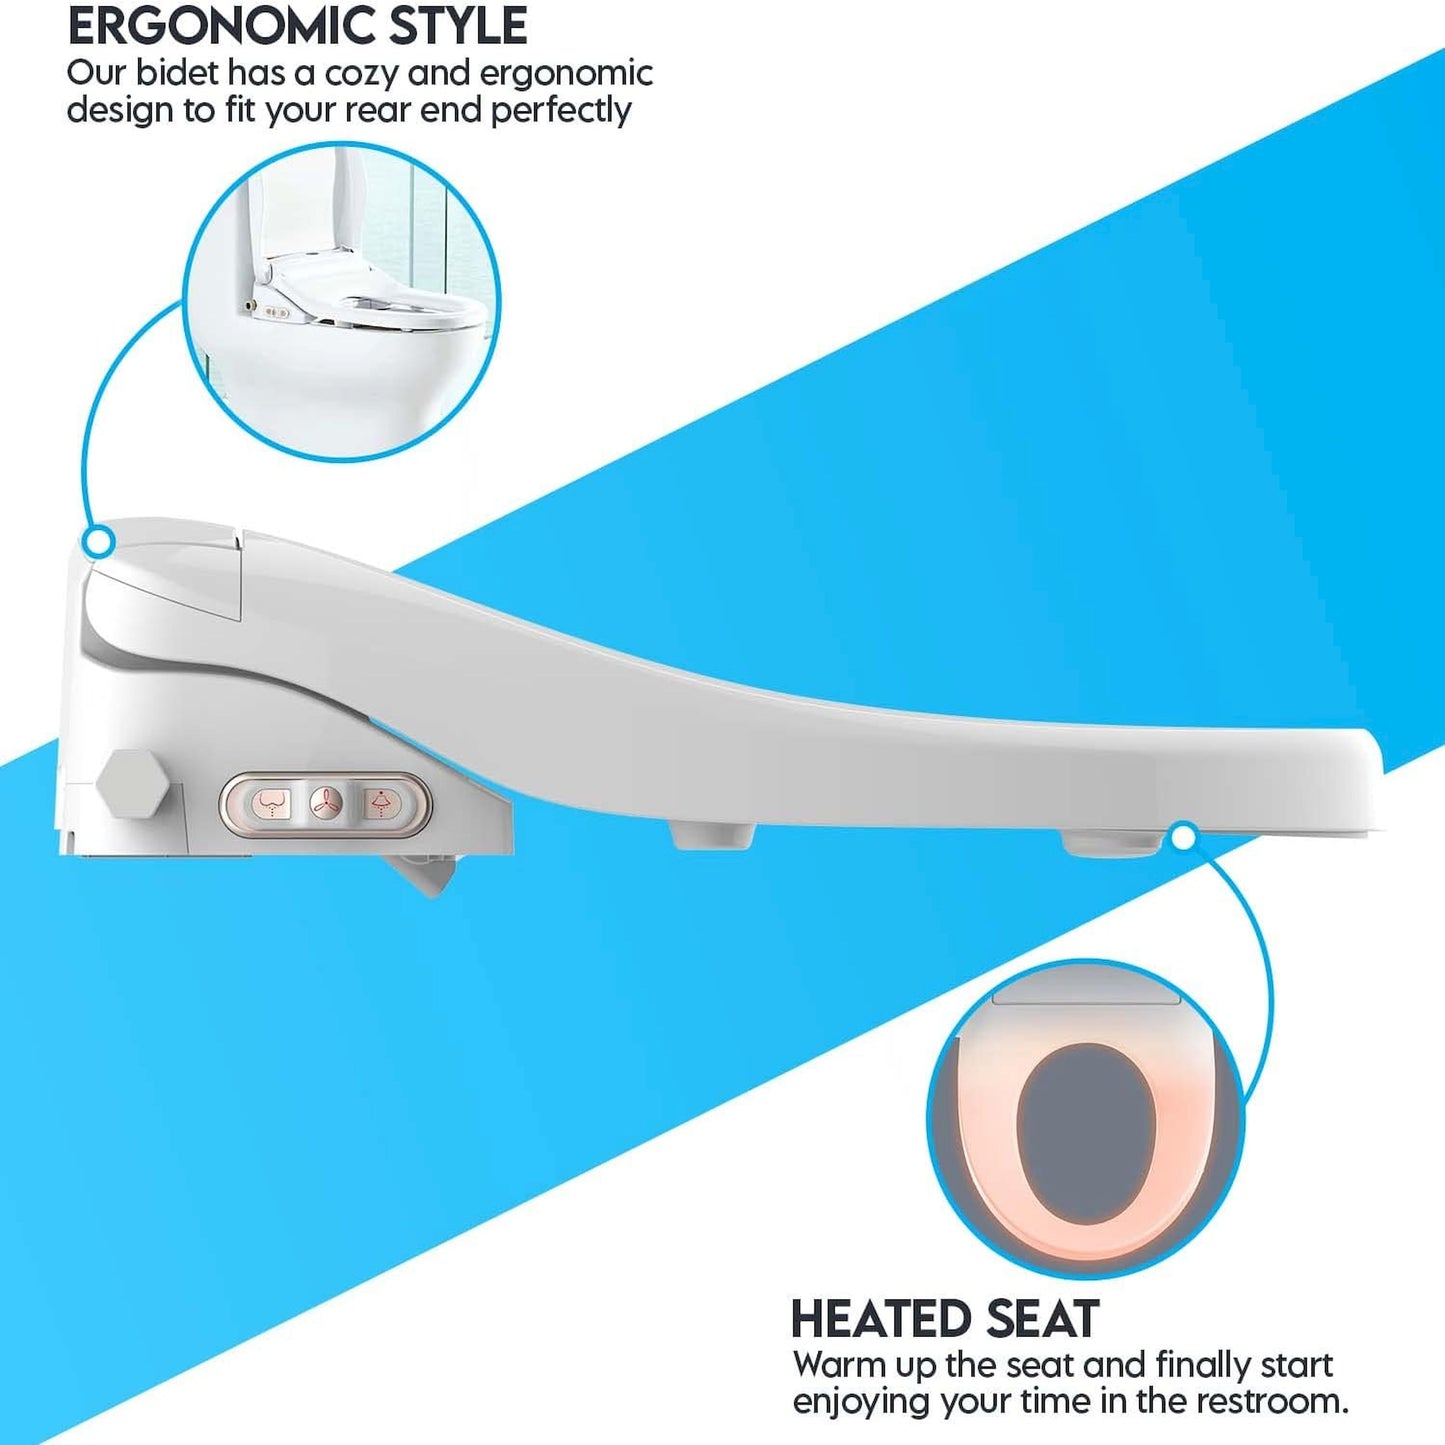 JEP Electric Bidet Toilet Seat for Elongated Toilets & Round Toilets | Premium Bidets for Existing Toilets with Warm Water, Heated Seat, and a Remote Control